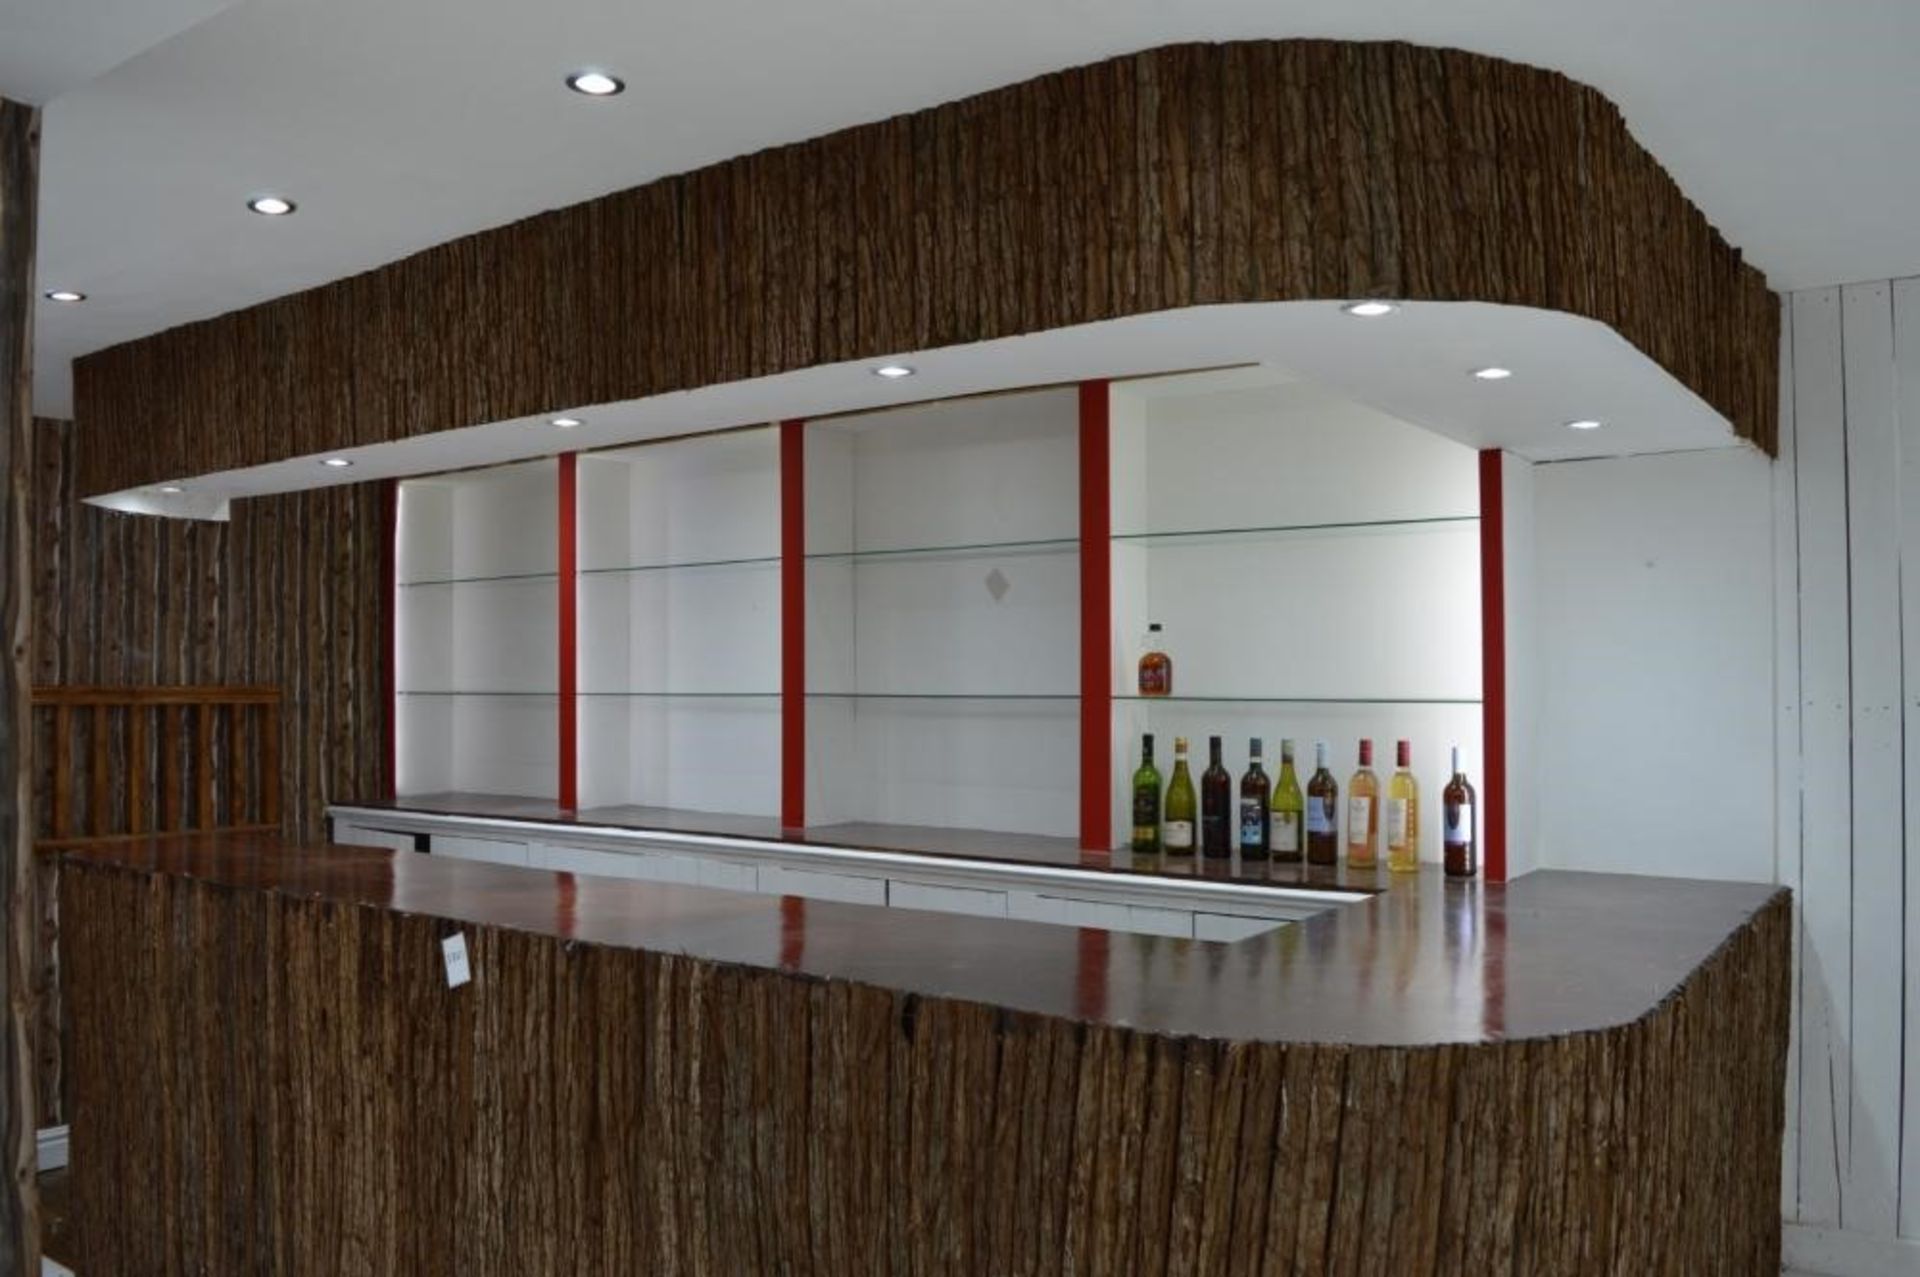 1 x Tiki Style Drinks Bar With Illuminated Rear Shelves and Unfinished Matching Seating Area - Ref B - Image 12 of 14